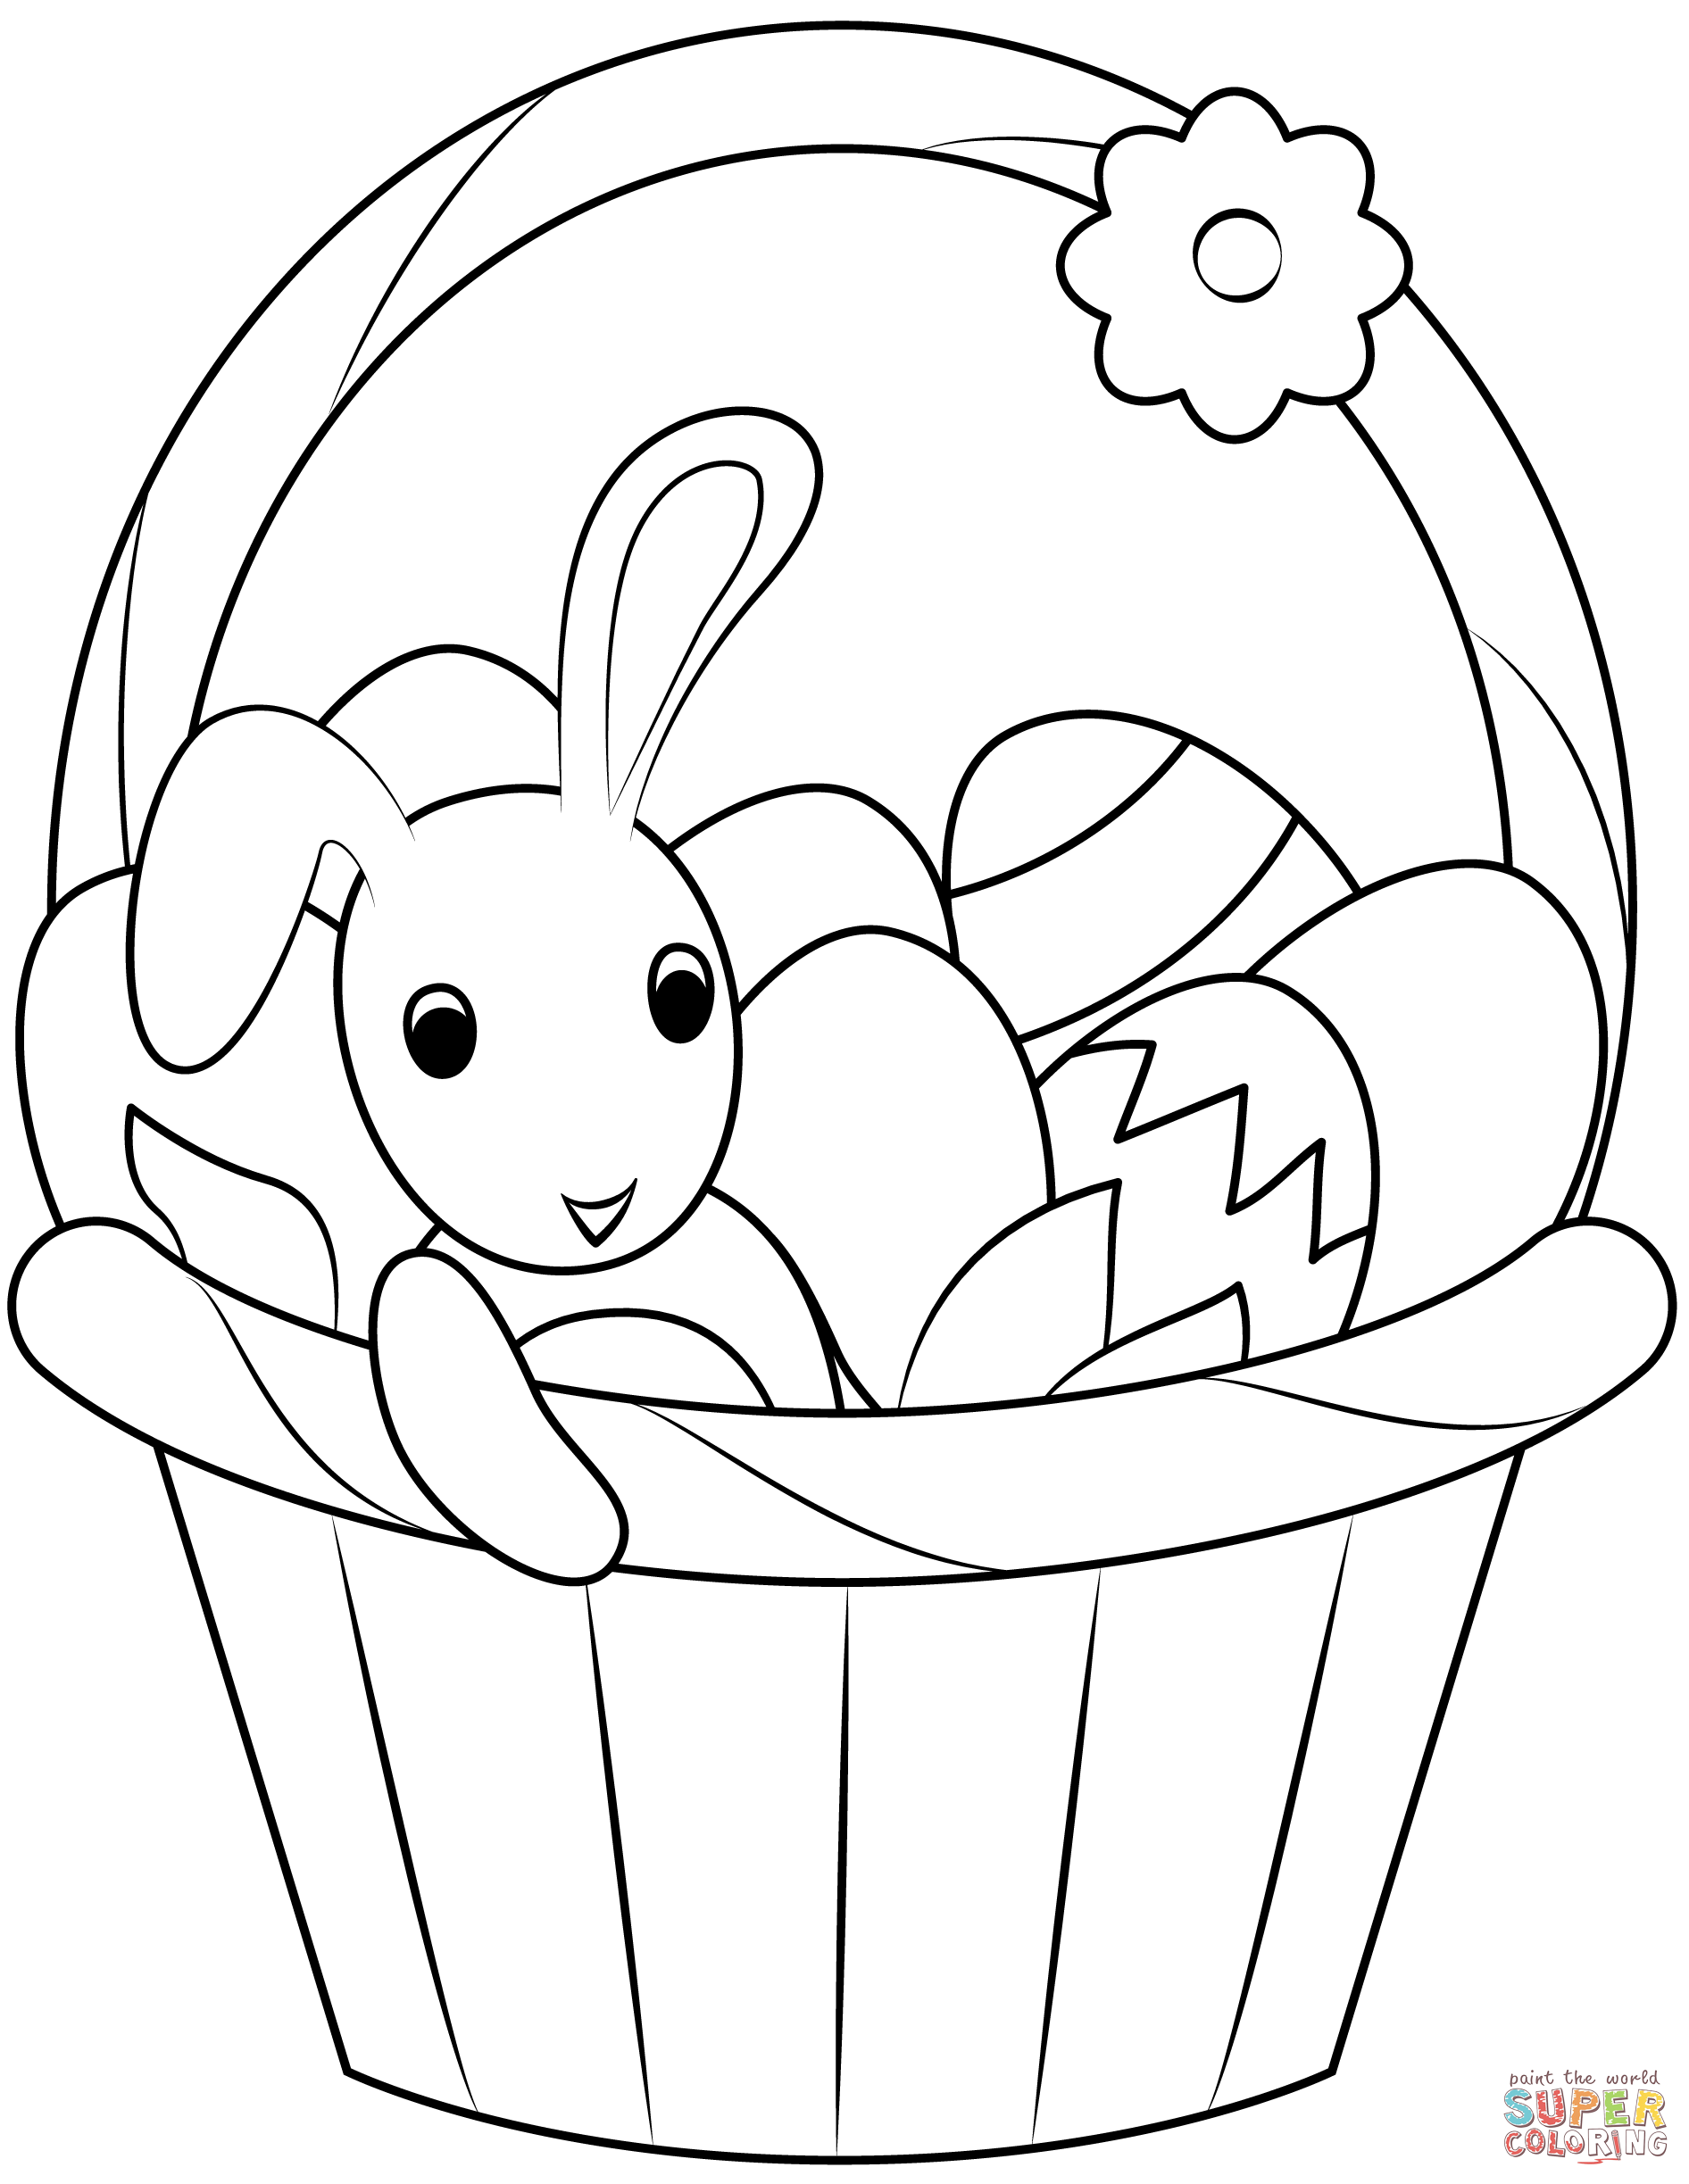 Easter basket coloring page free printable coloring pages